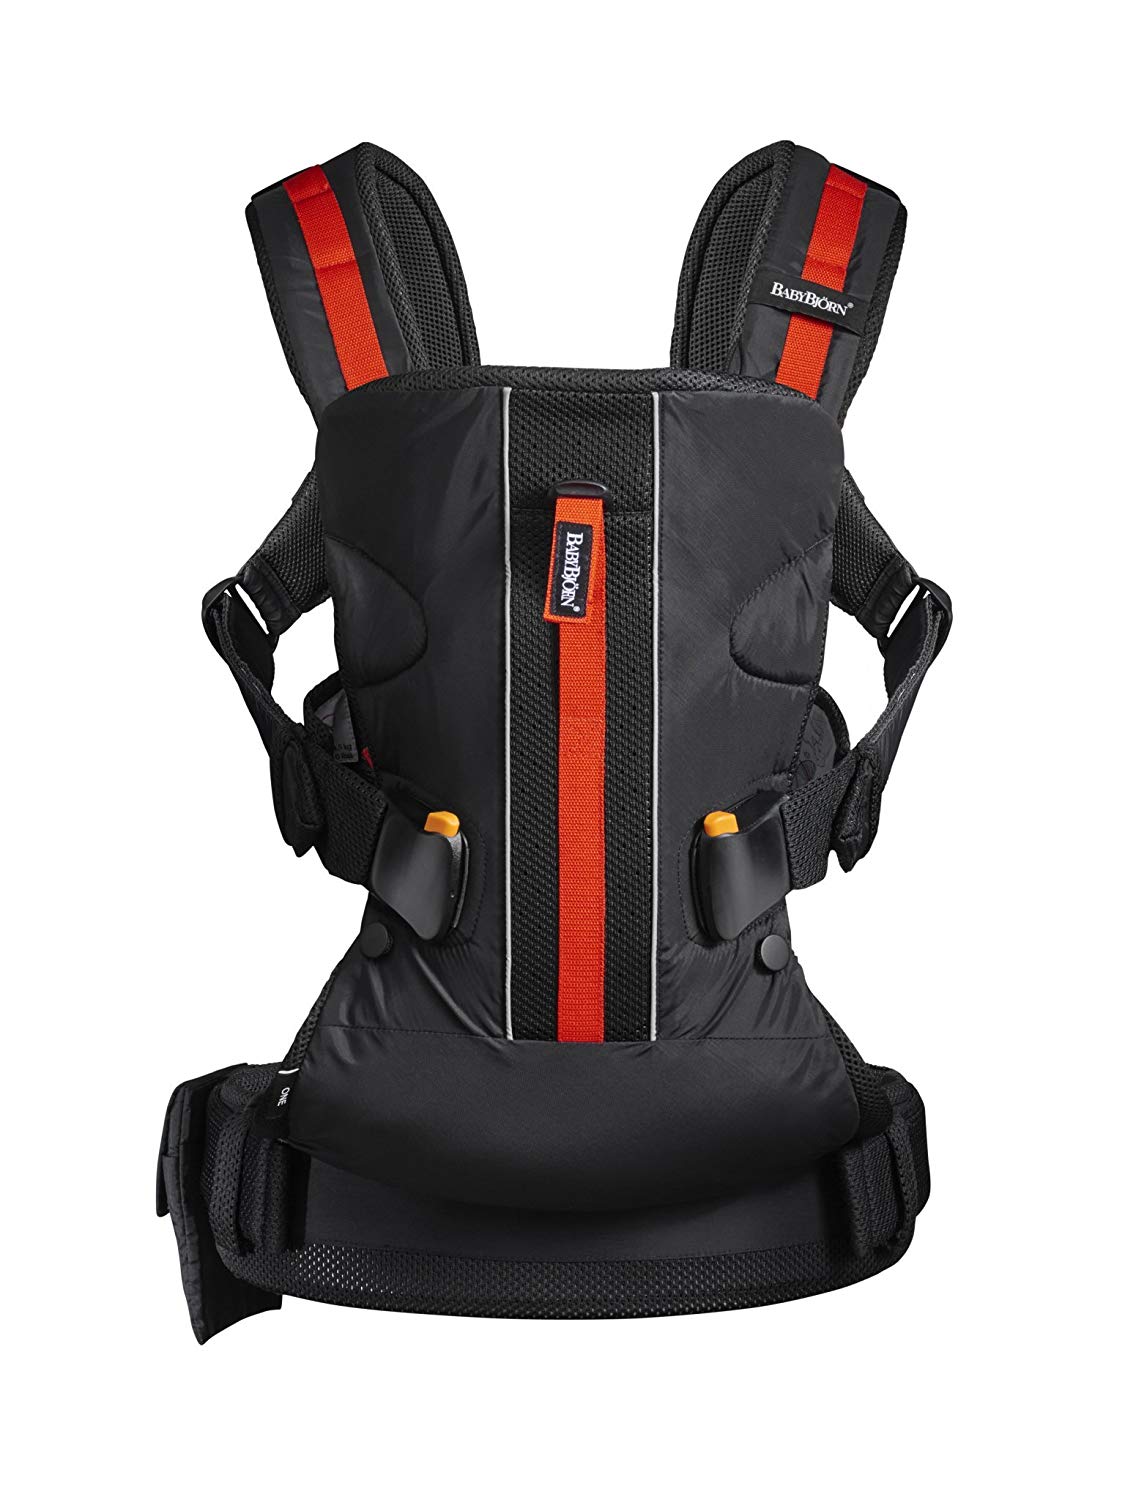 Baby Bjorn BABYBJÖRN Abytrage One Outdoors, Black